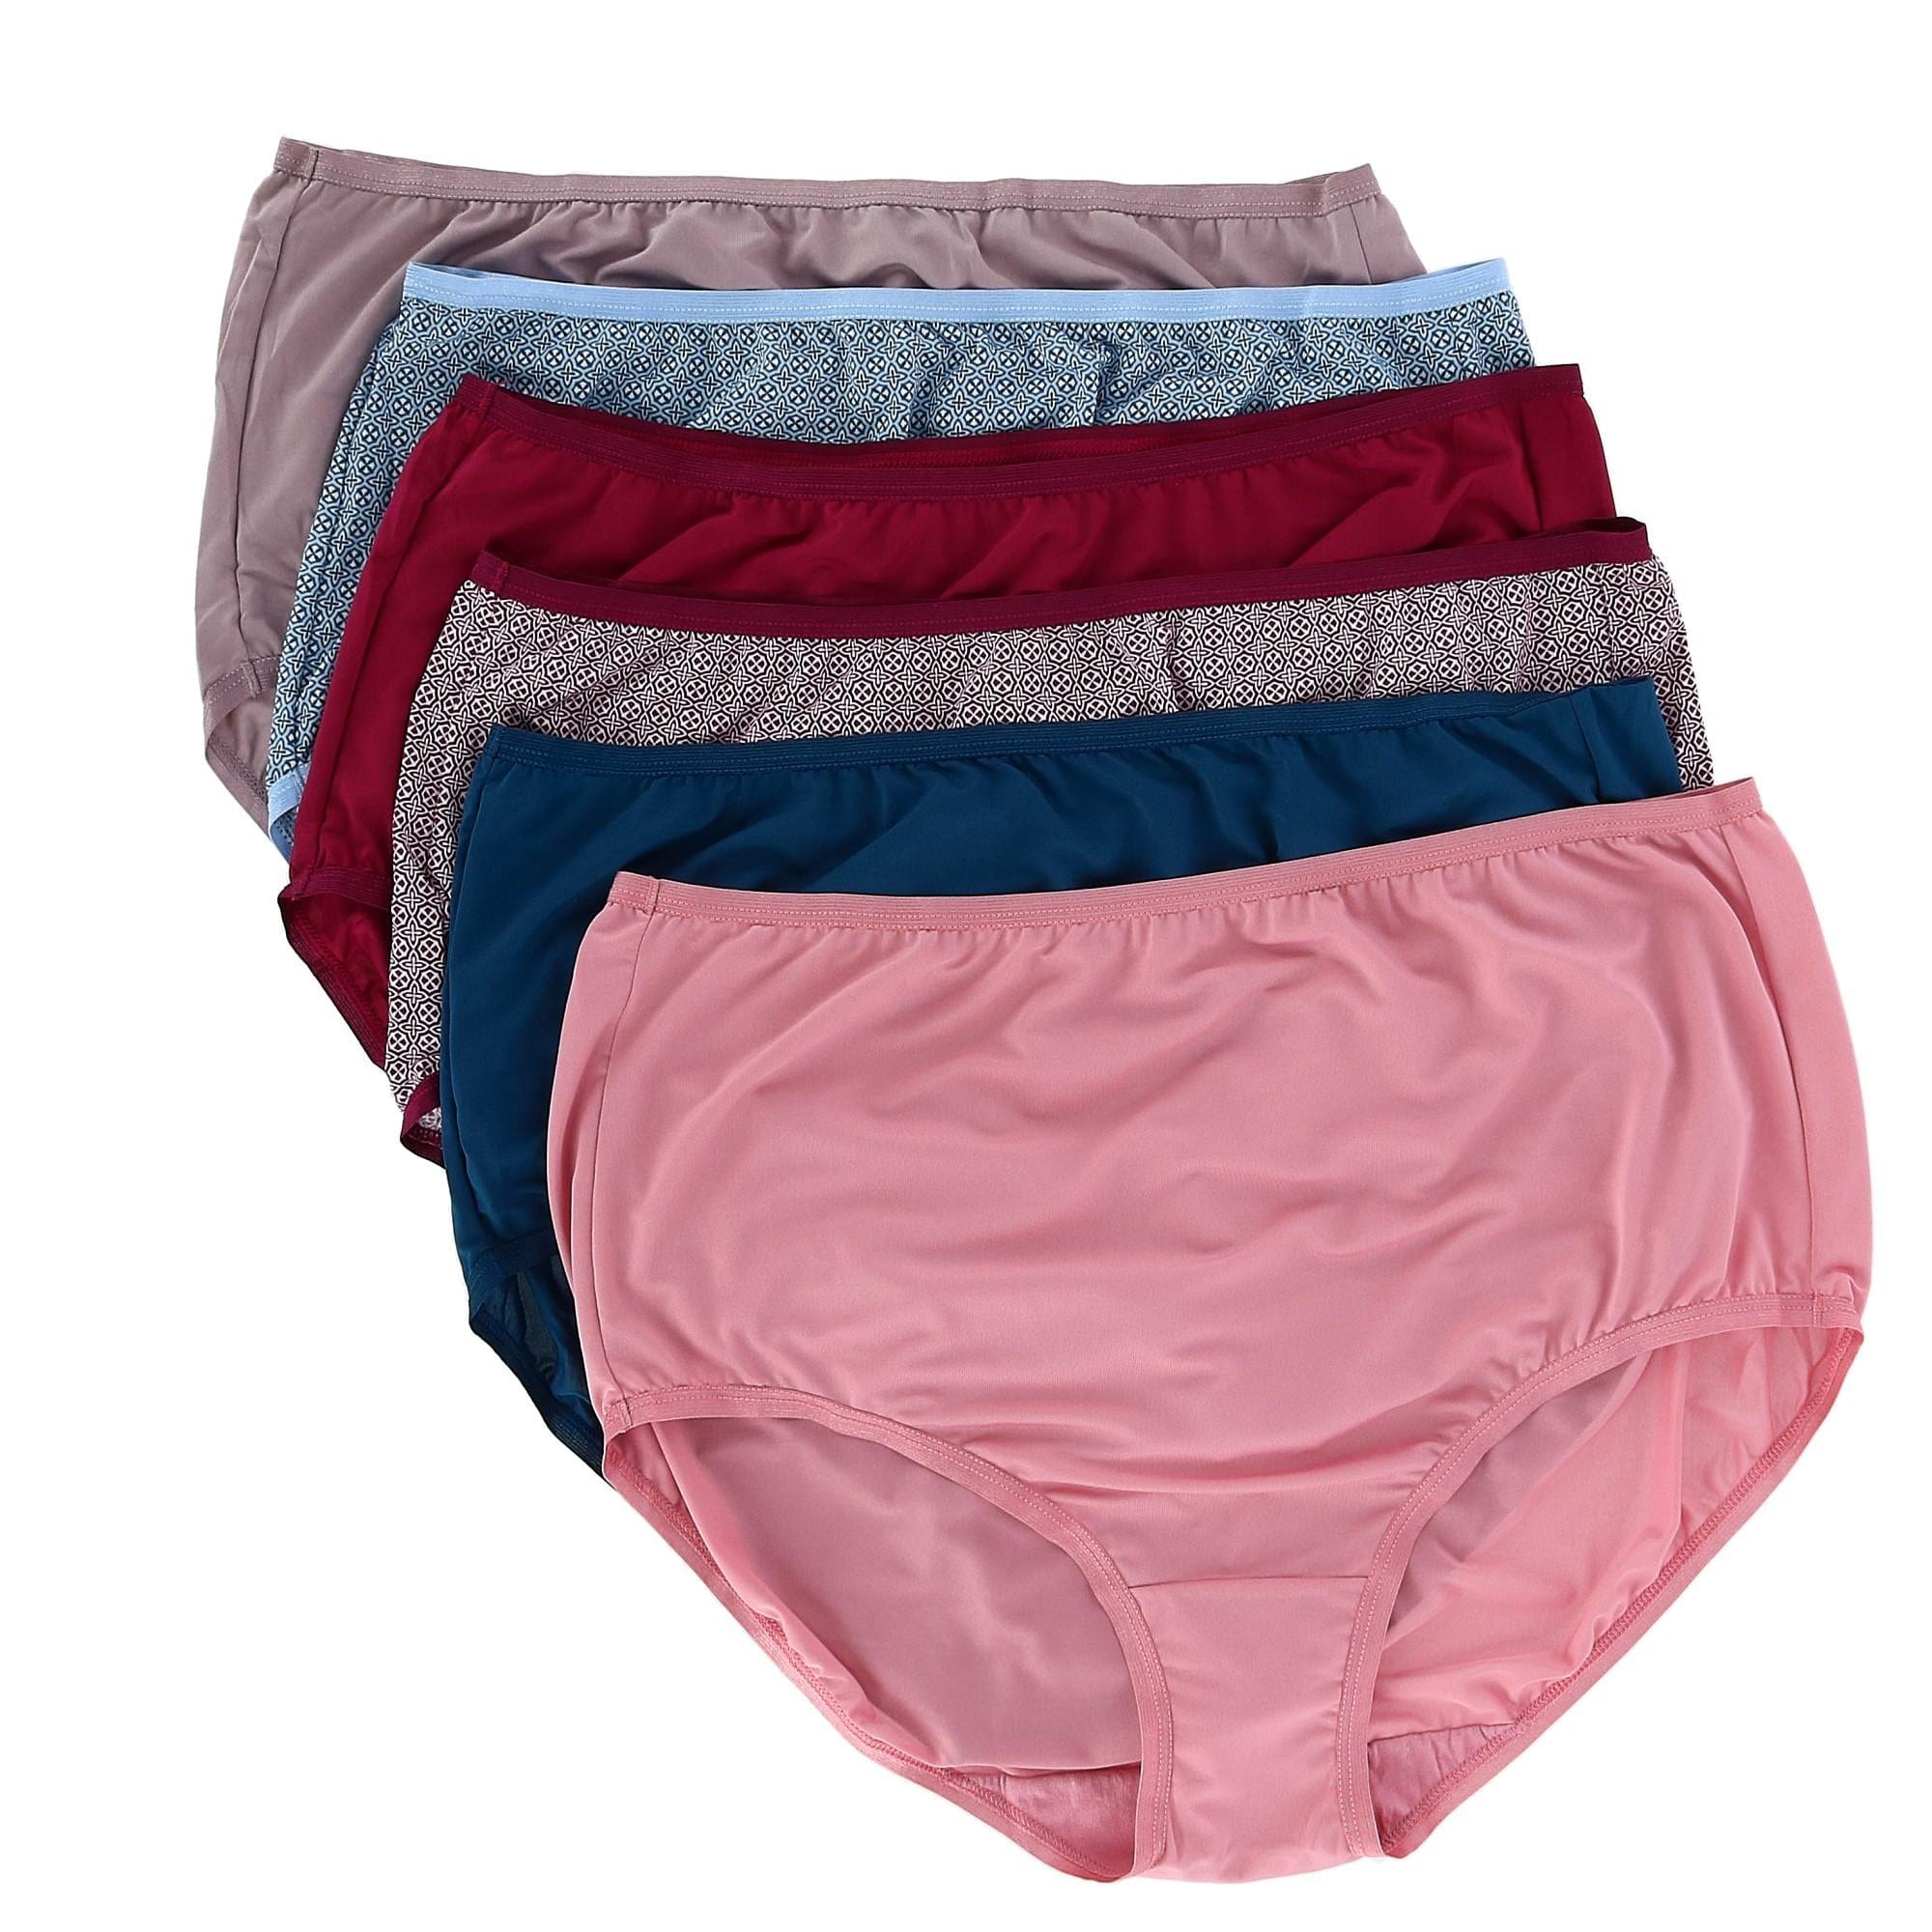 Women's Fruit of The Loom Fit For Me Cotton or Microfiber Briefs: Size-10